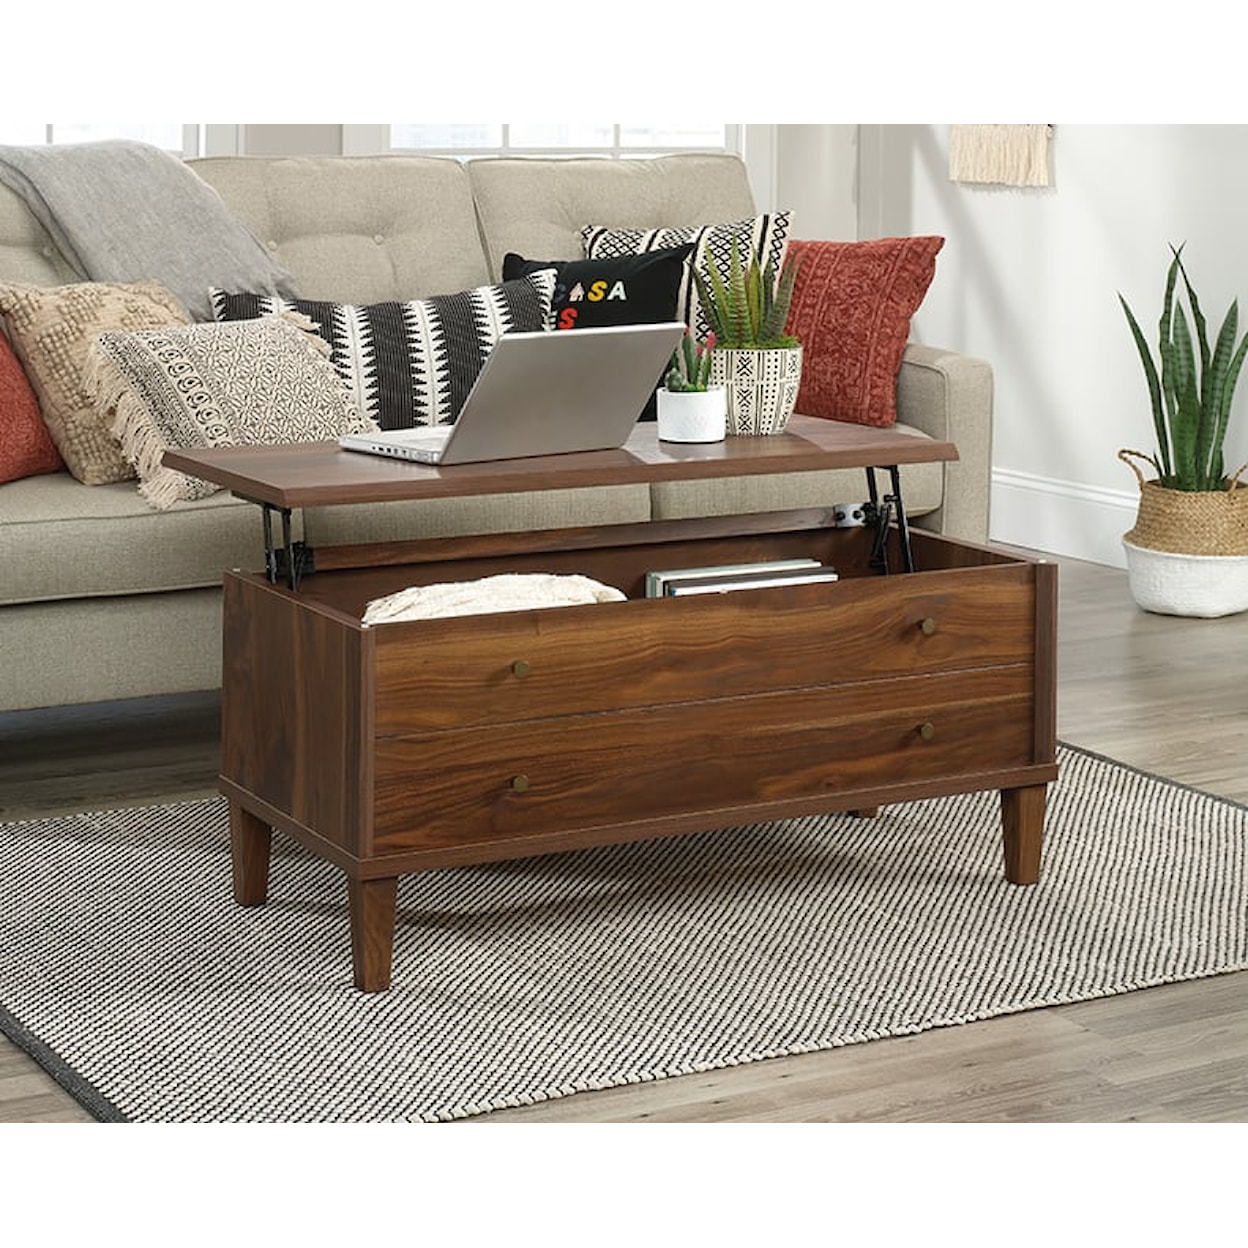 Sauder Willow Place Lift-Top Coffee Table